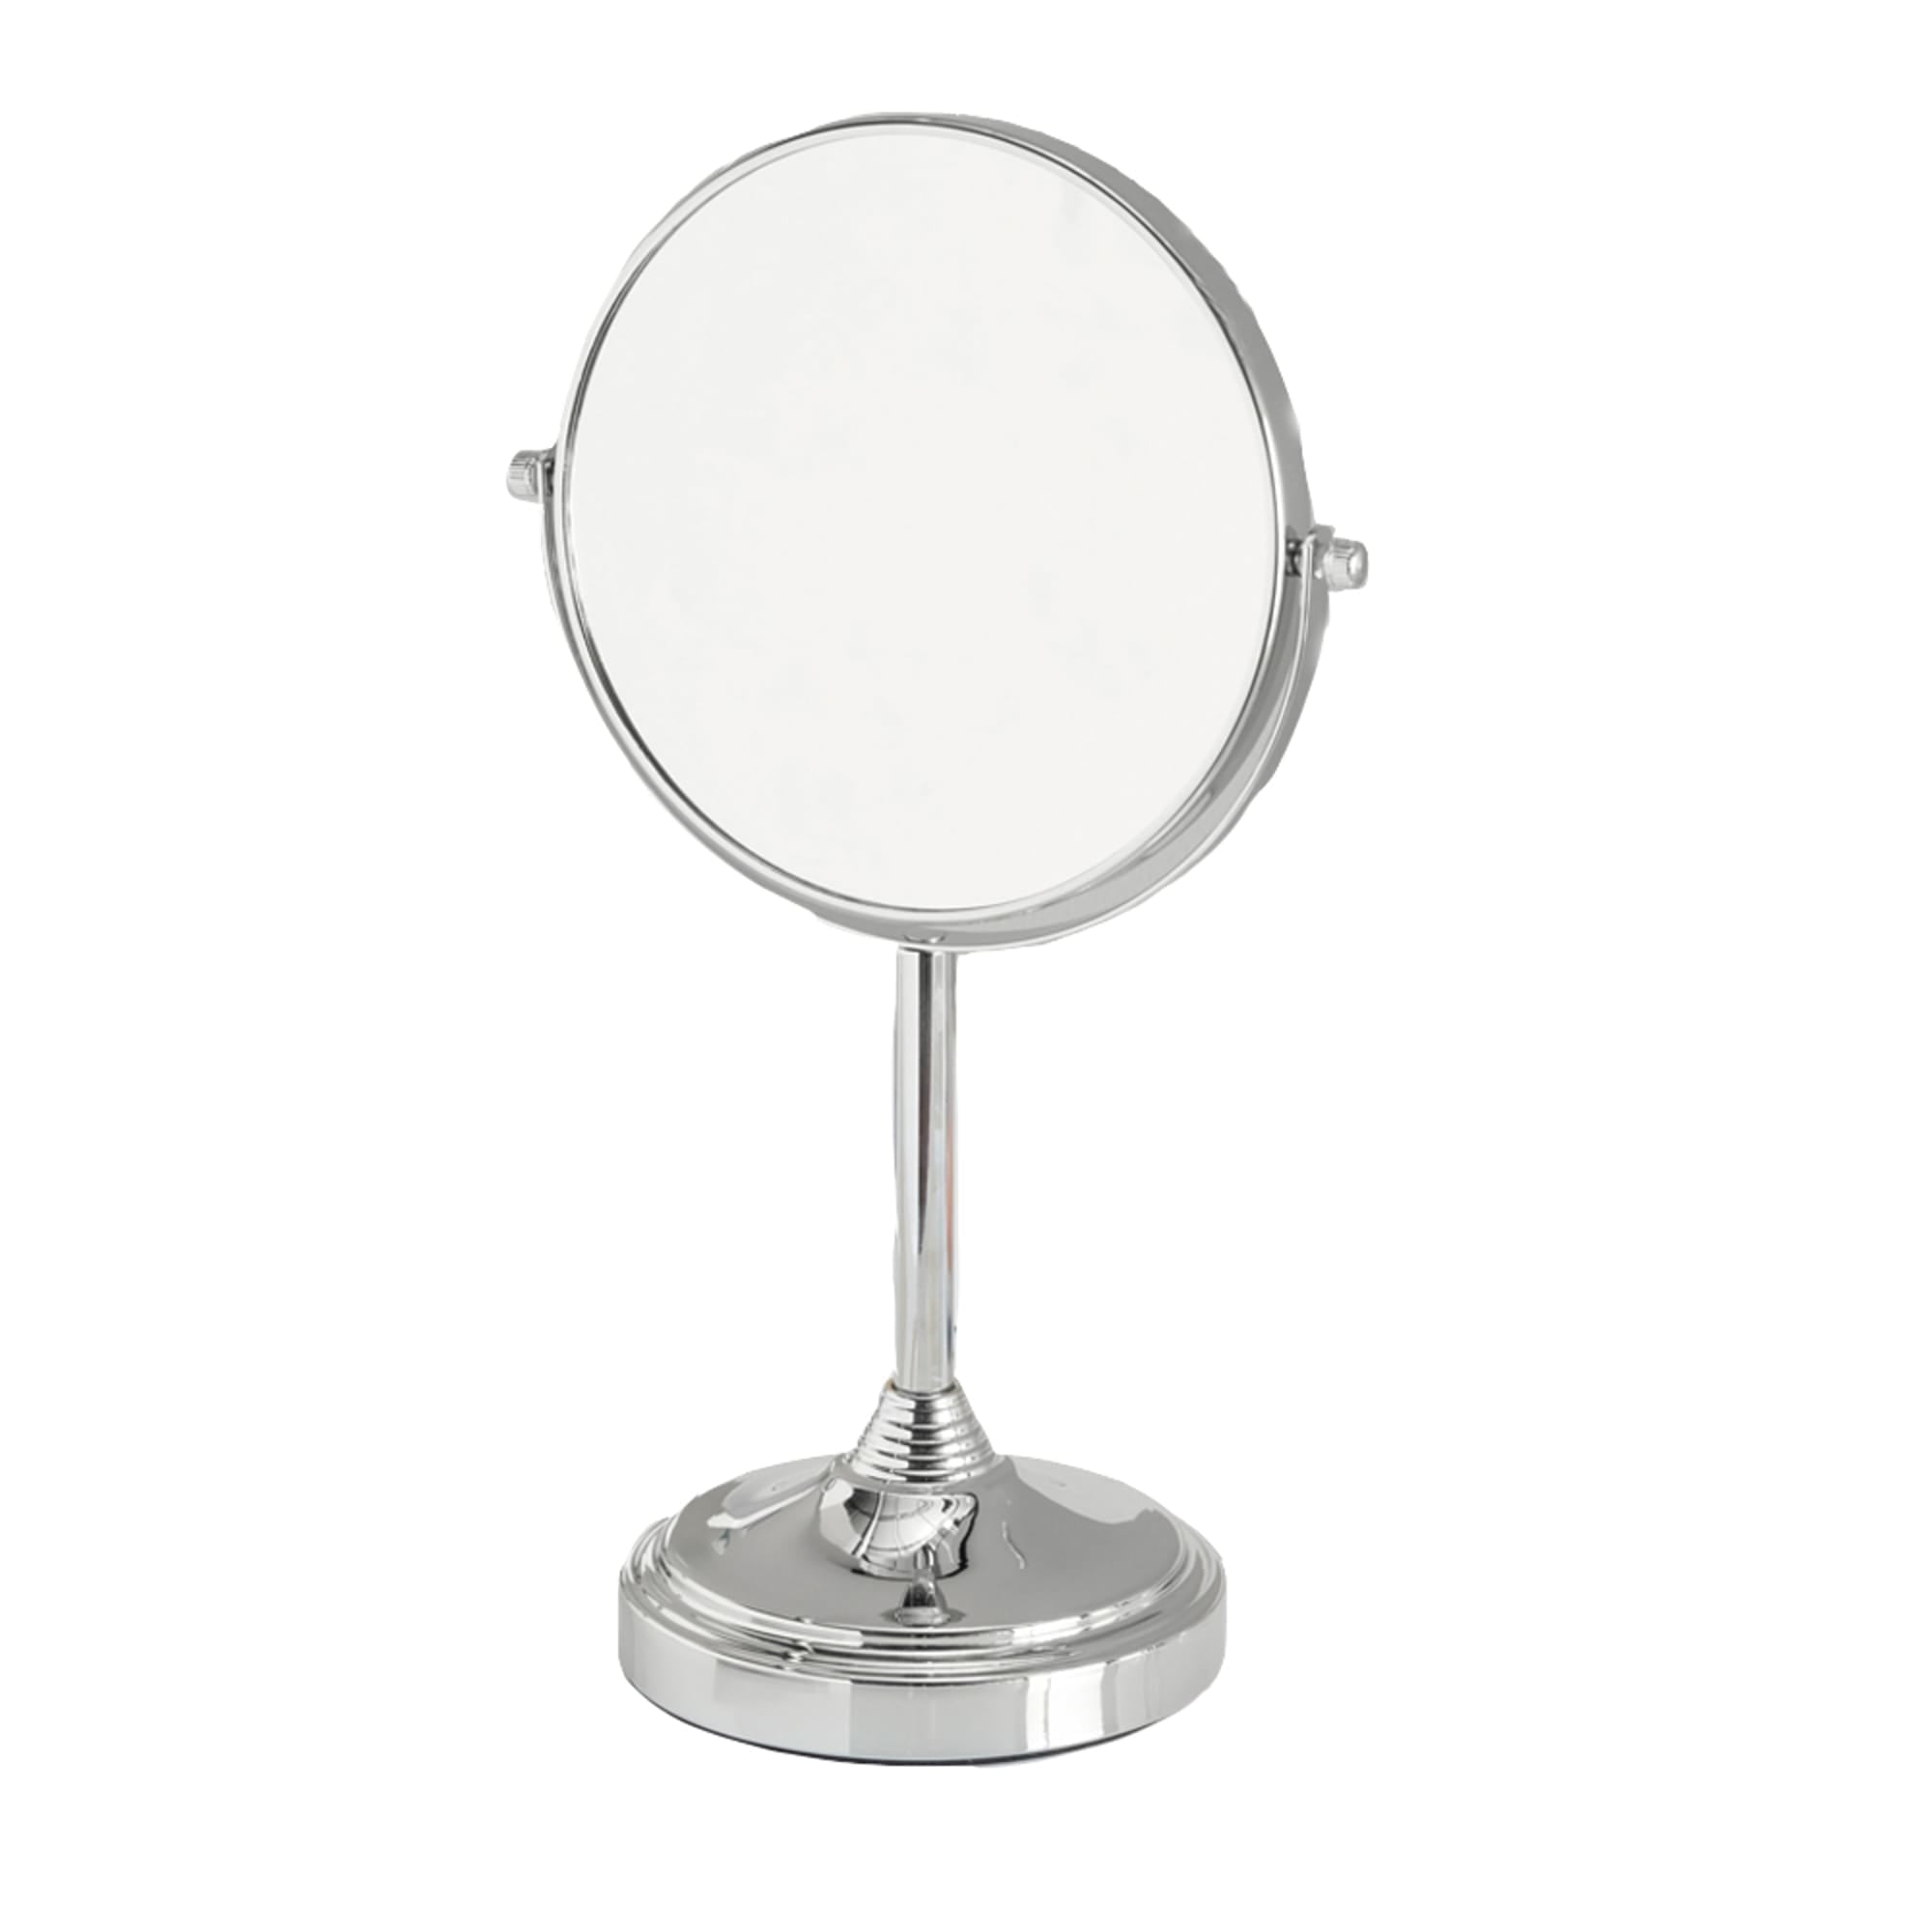 Home Basics Elizabeth Collection Cosmetic Mirror, Chrome $15.00 EACH, CASE PACK OF 6